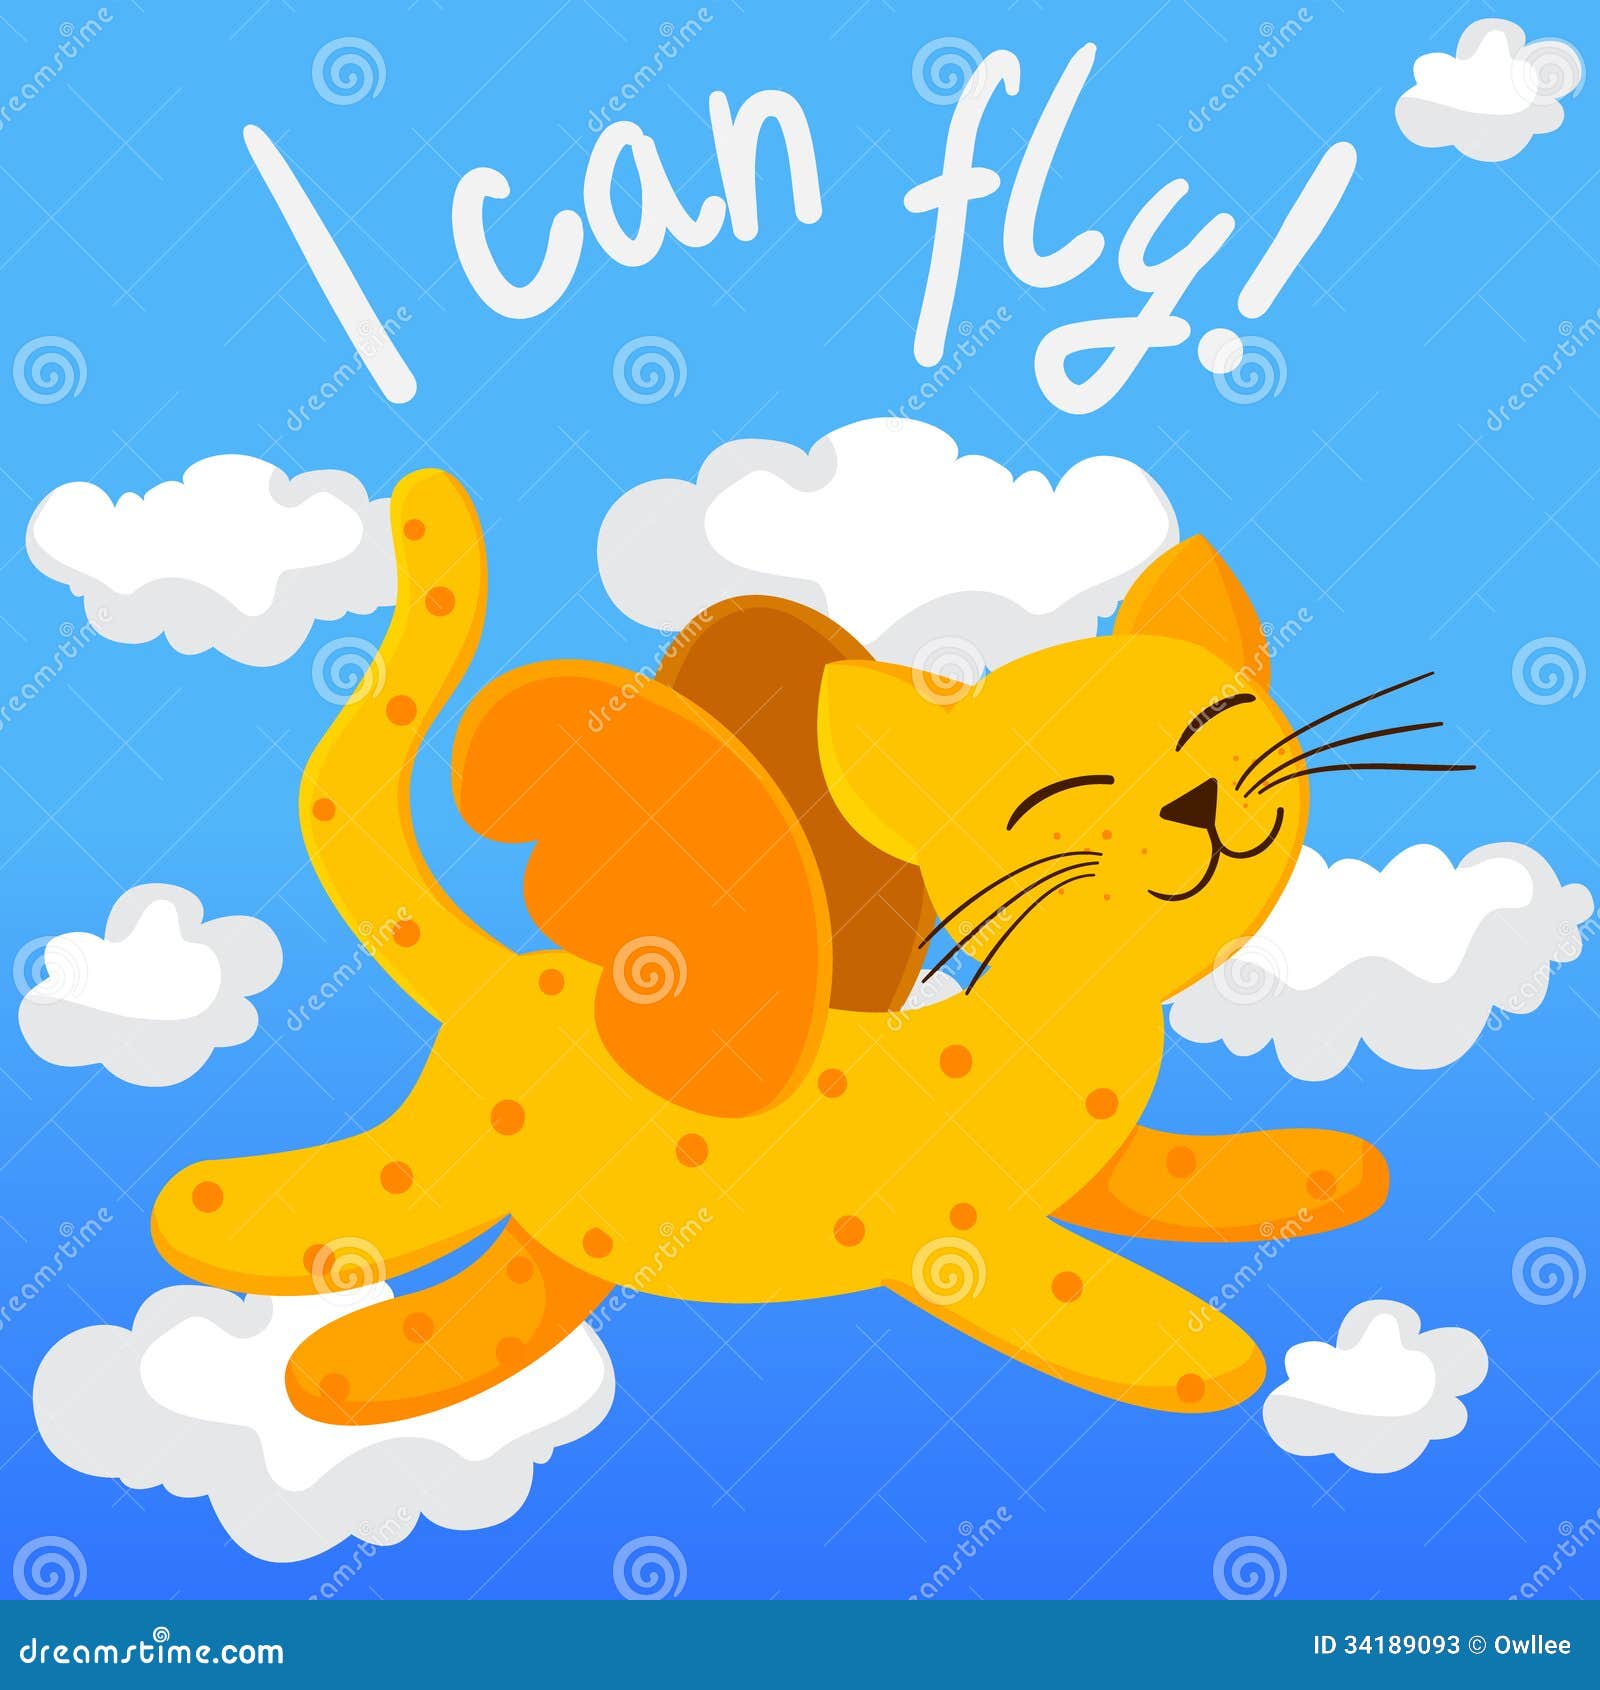  Cartoon  Flying Cat With Wings  Stock Vector Illustration 